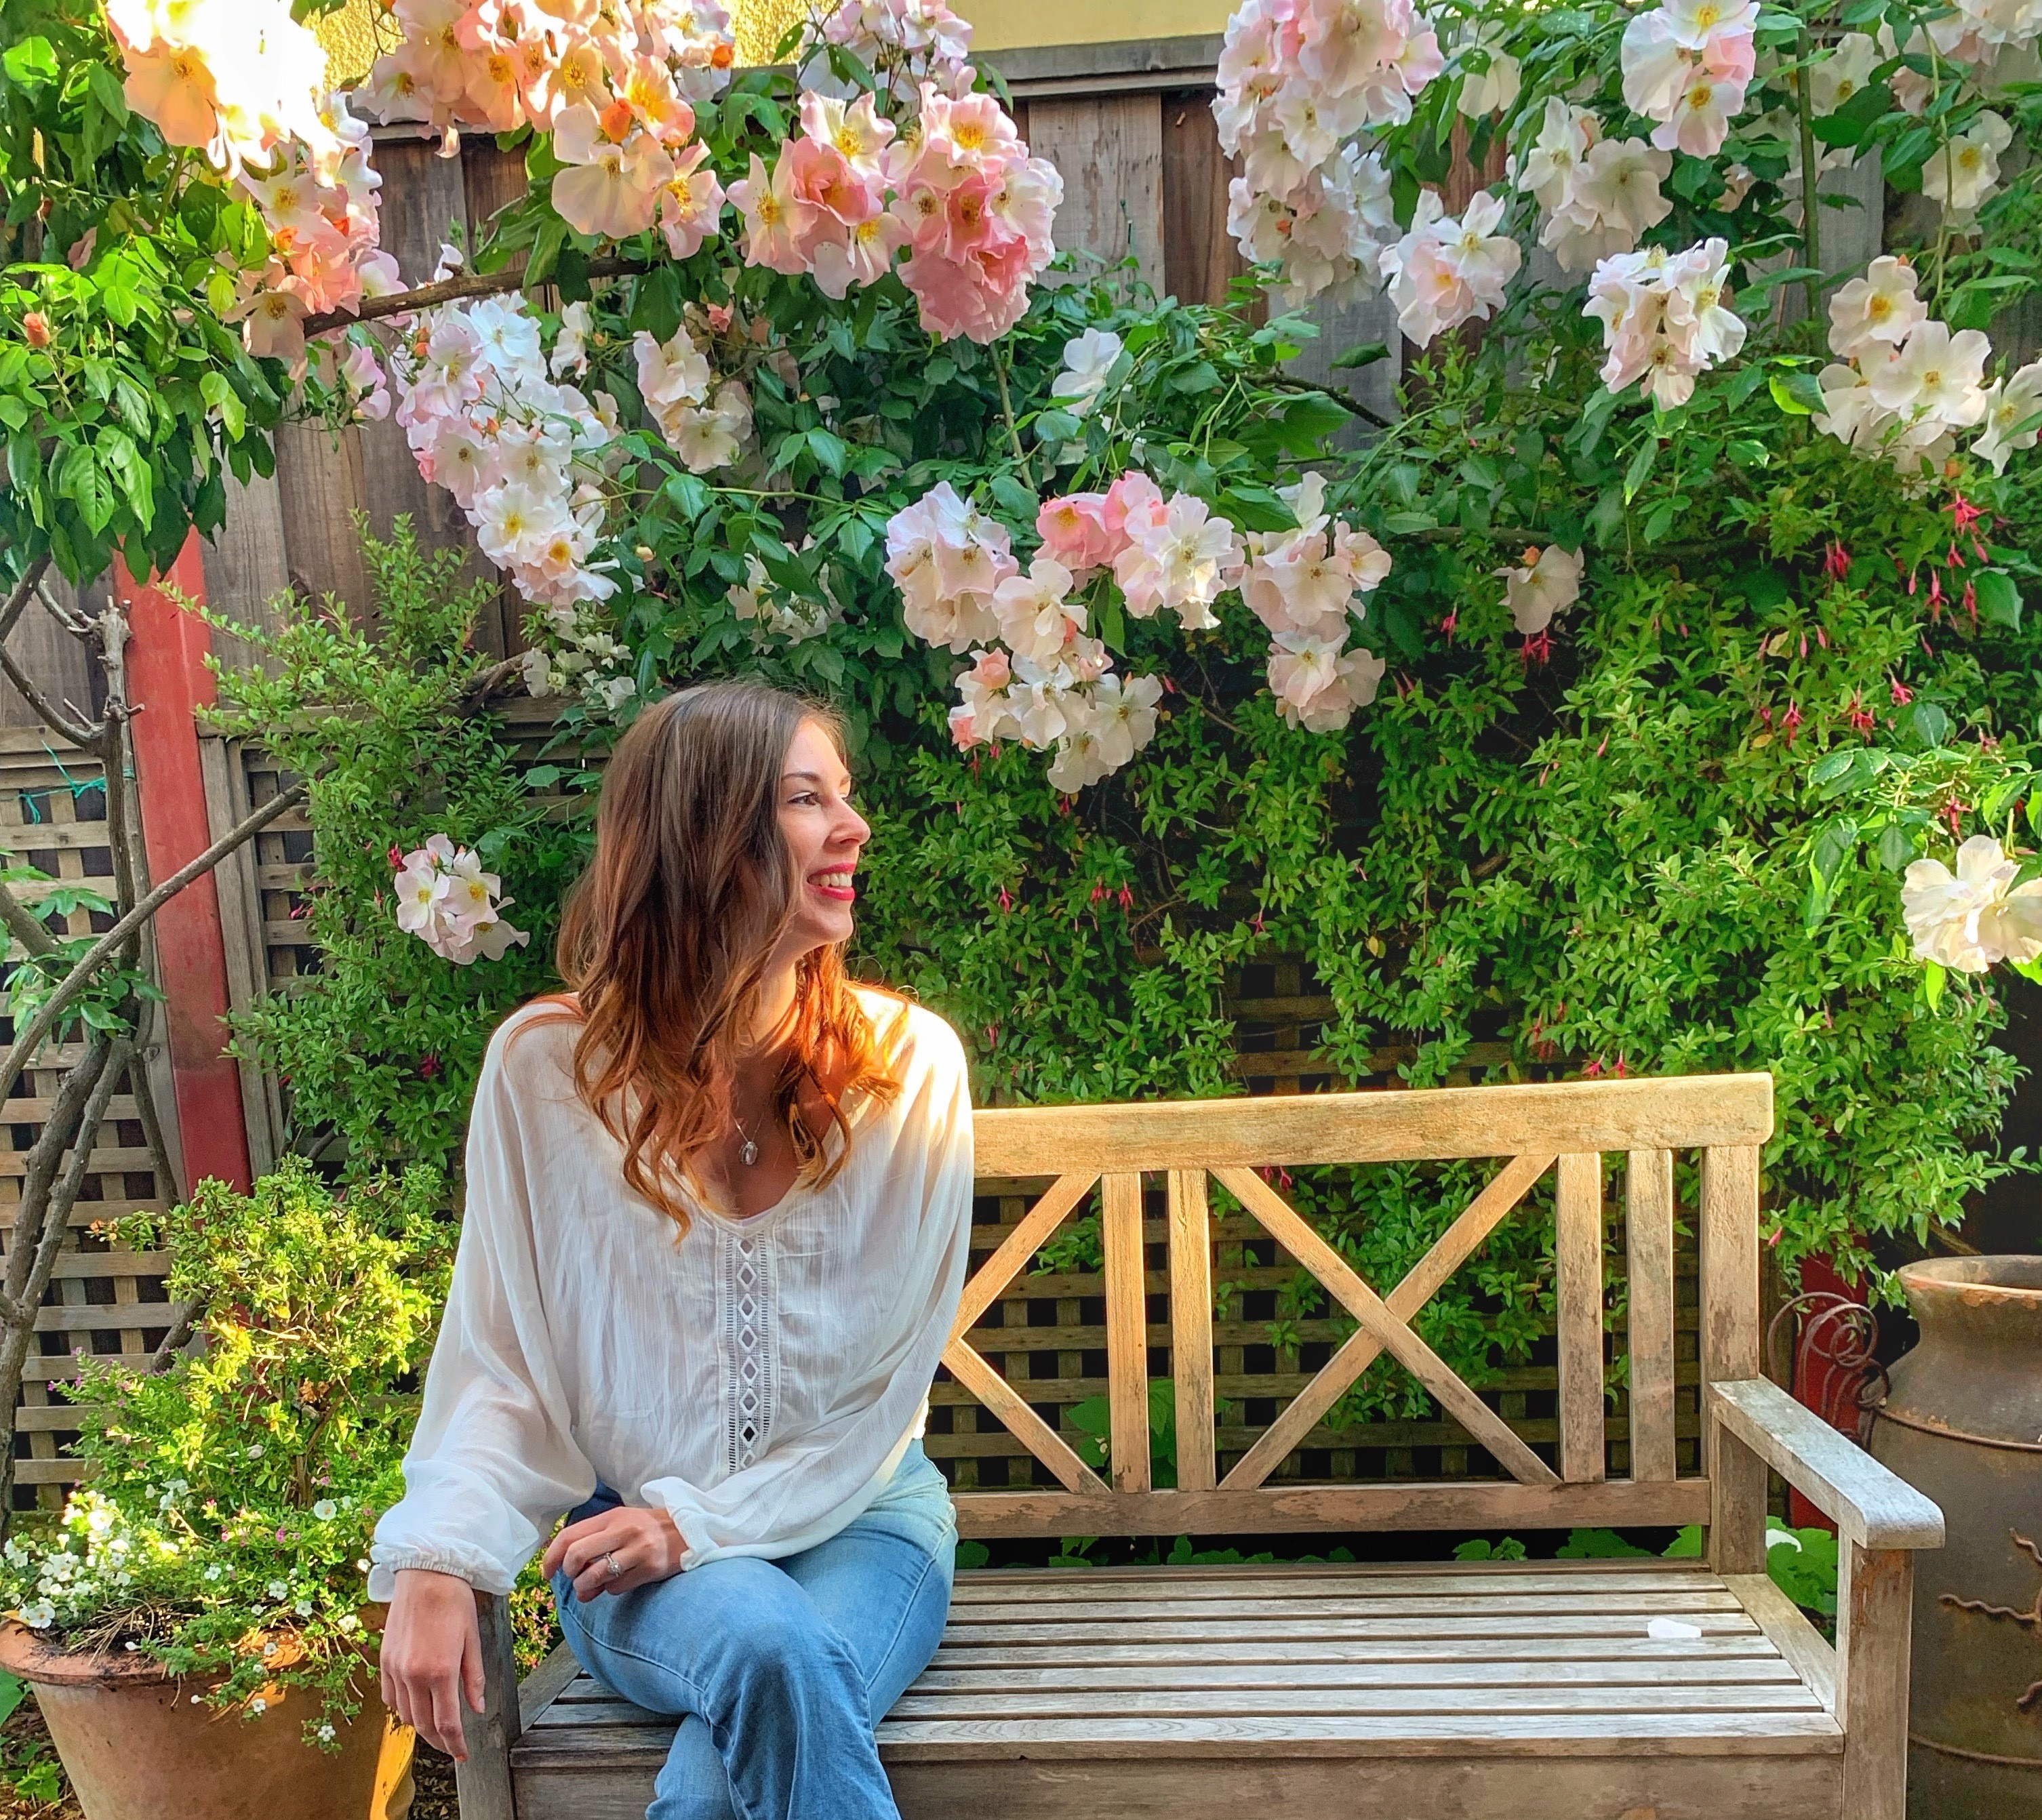 Jenna sitting on a bench in front of a wall of flowers smiling toward the sun